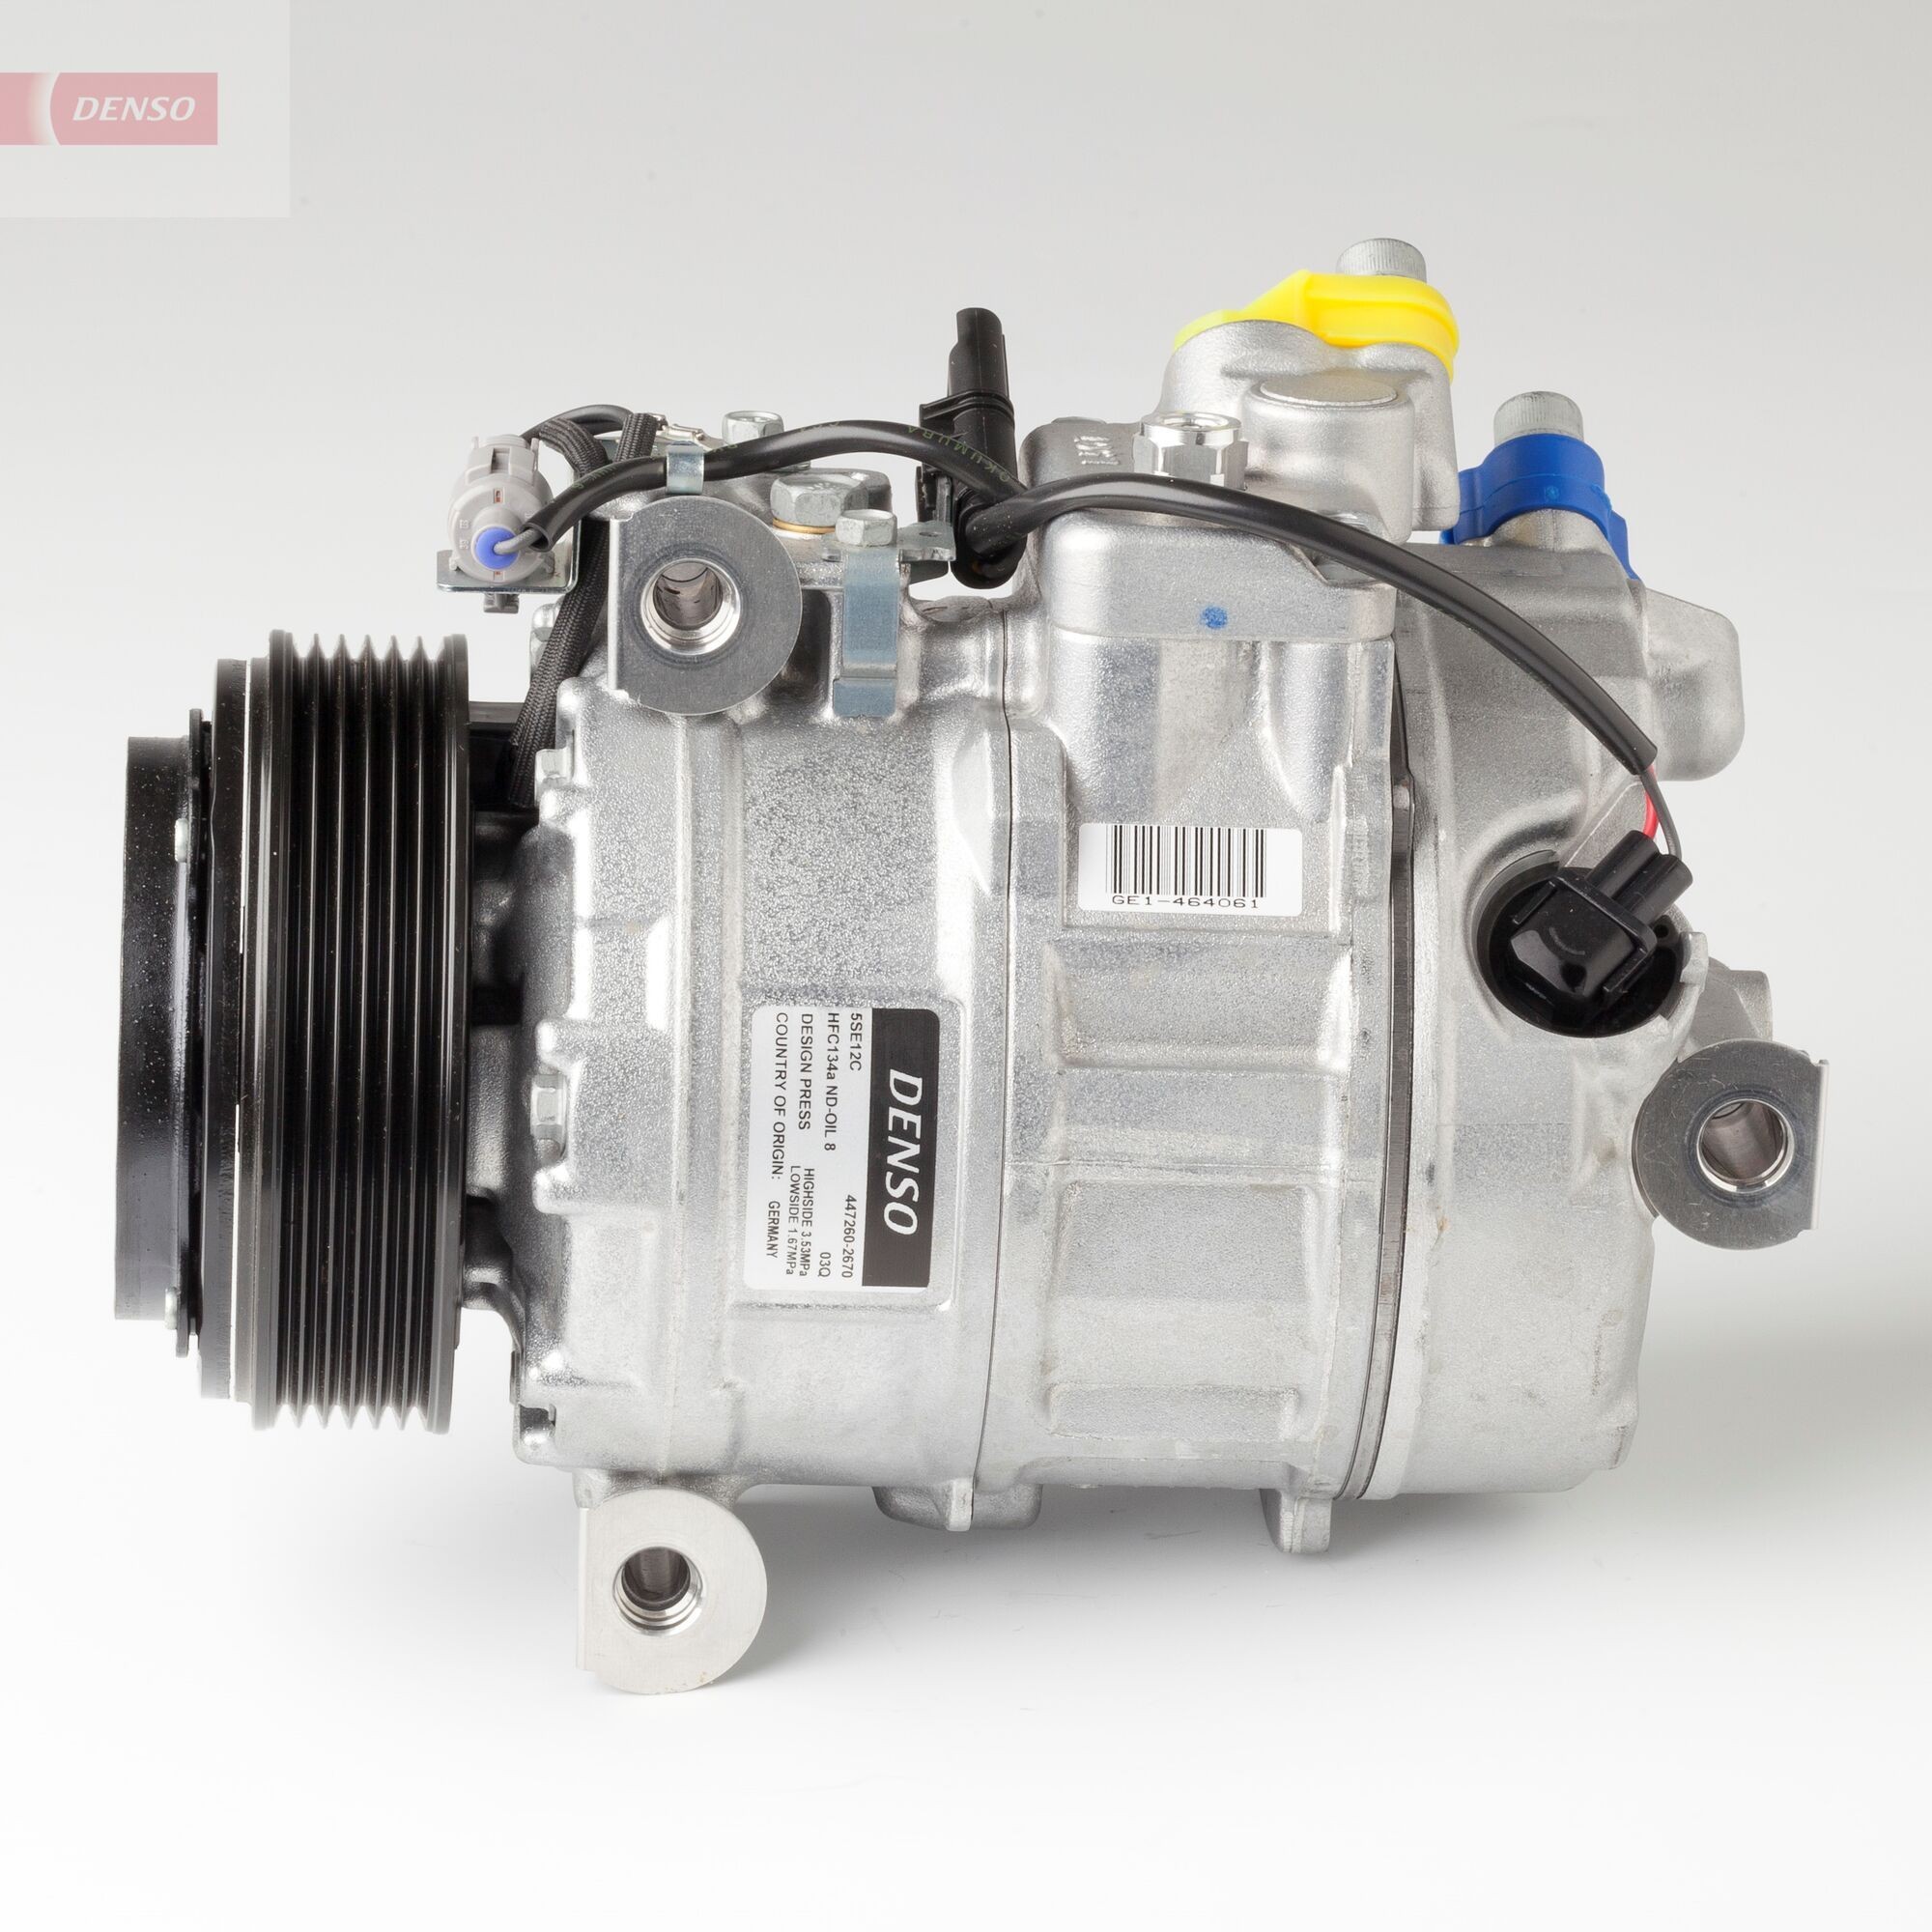 DENSO Air conditioning compressor DCP05093 BMW 5 Series 2009